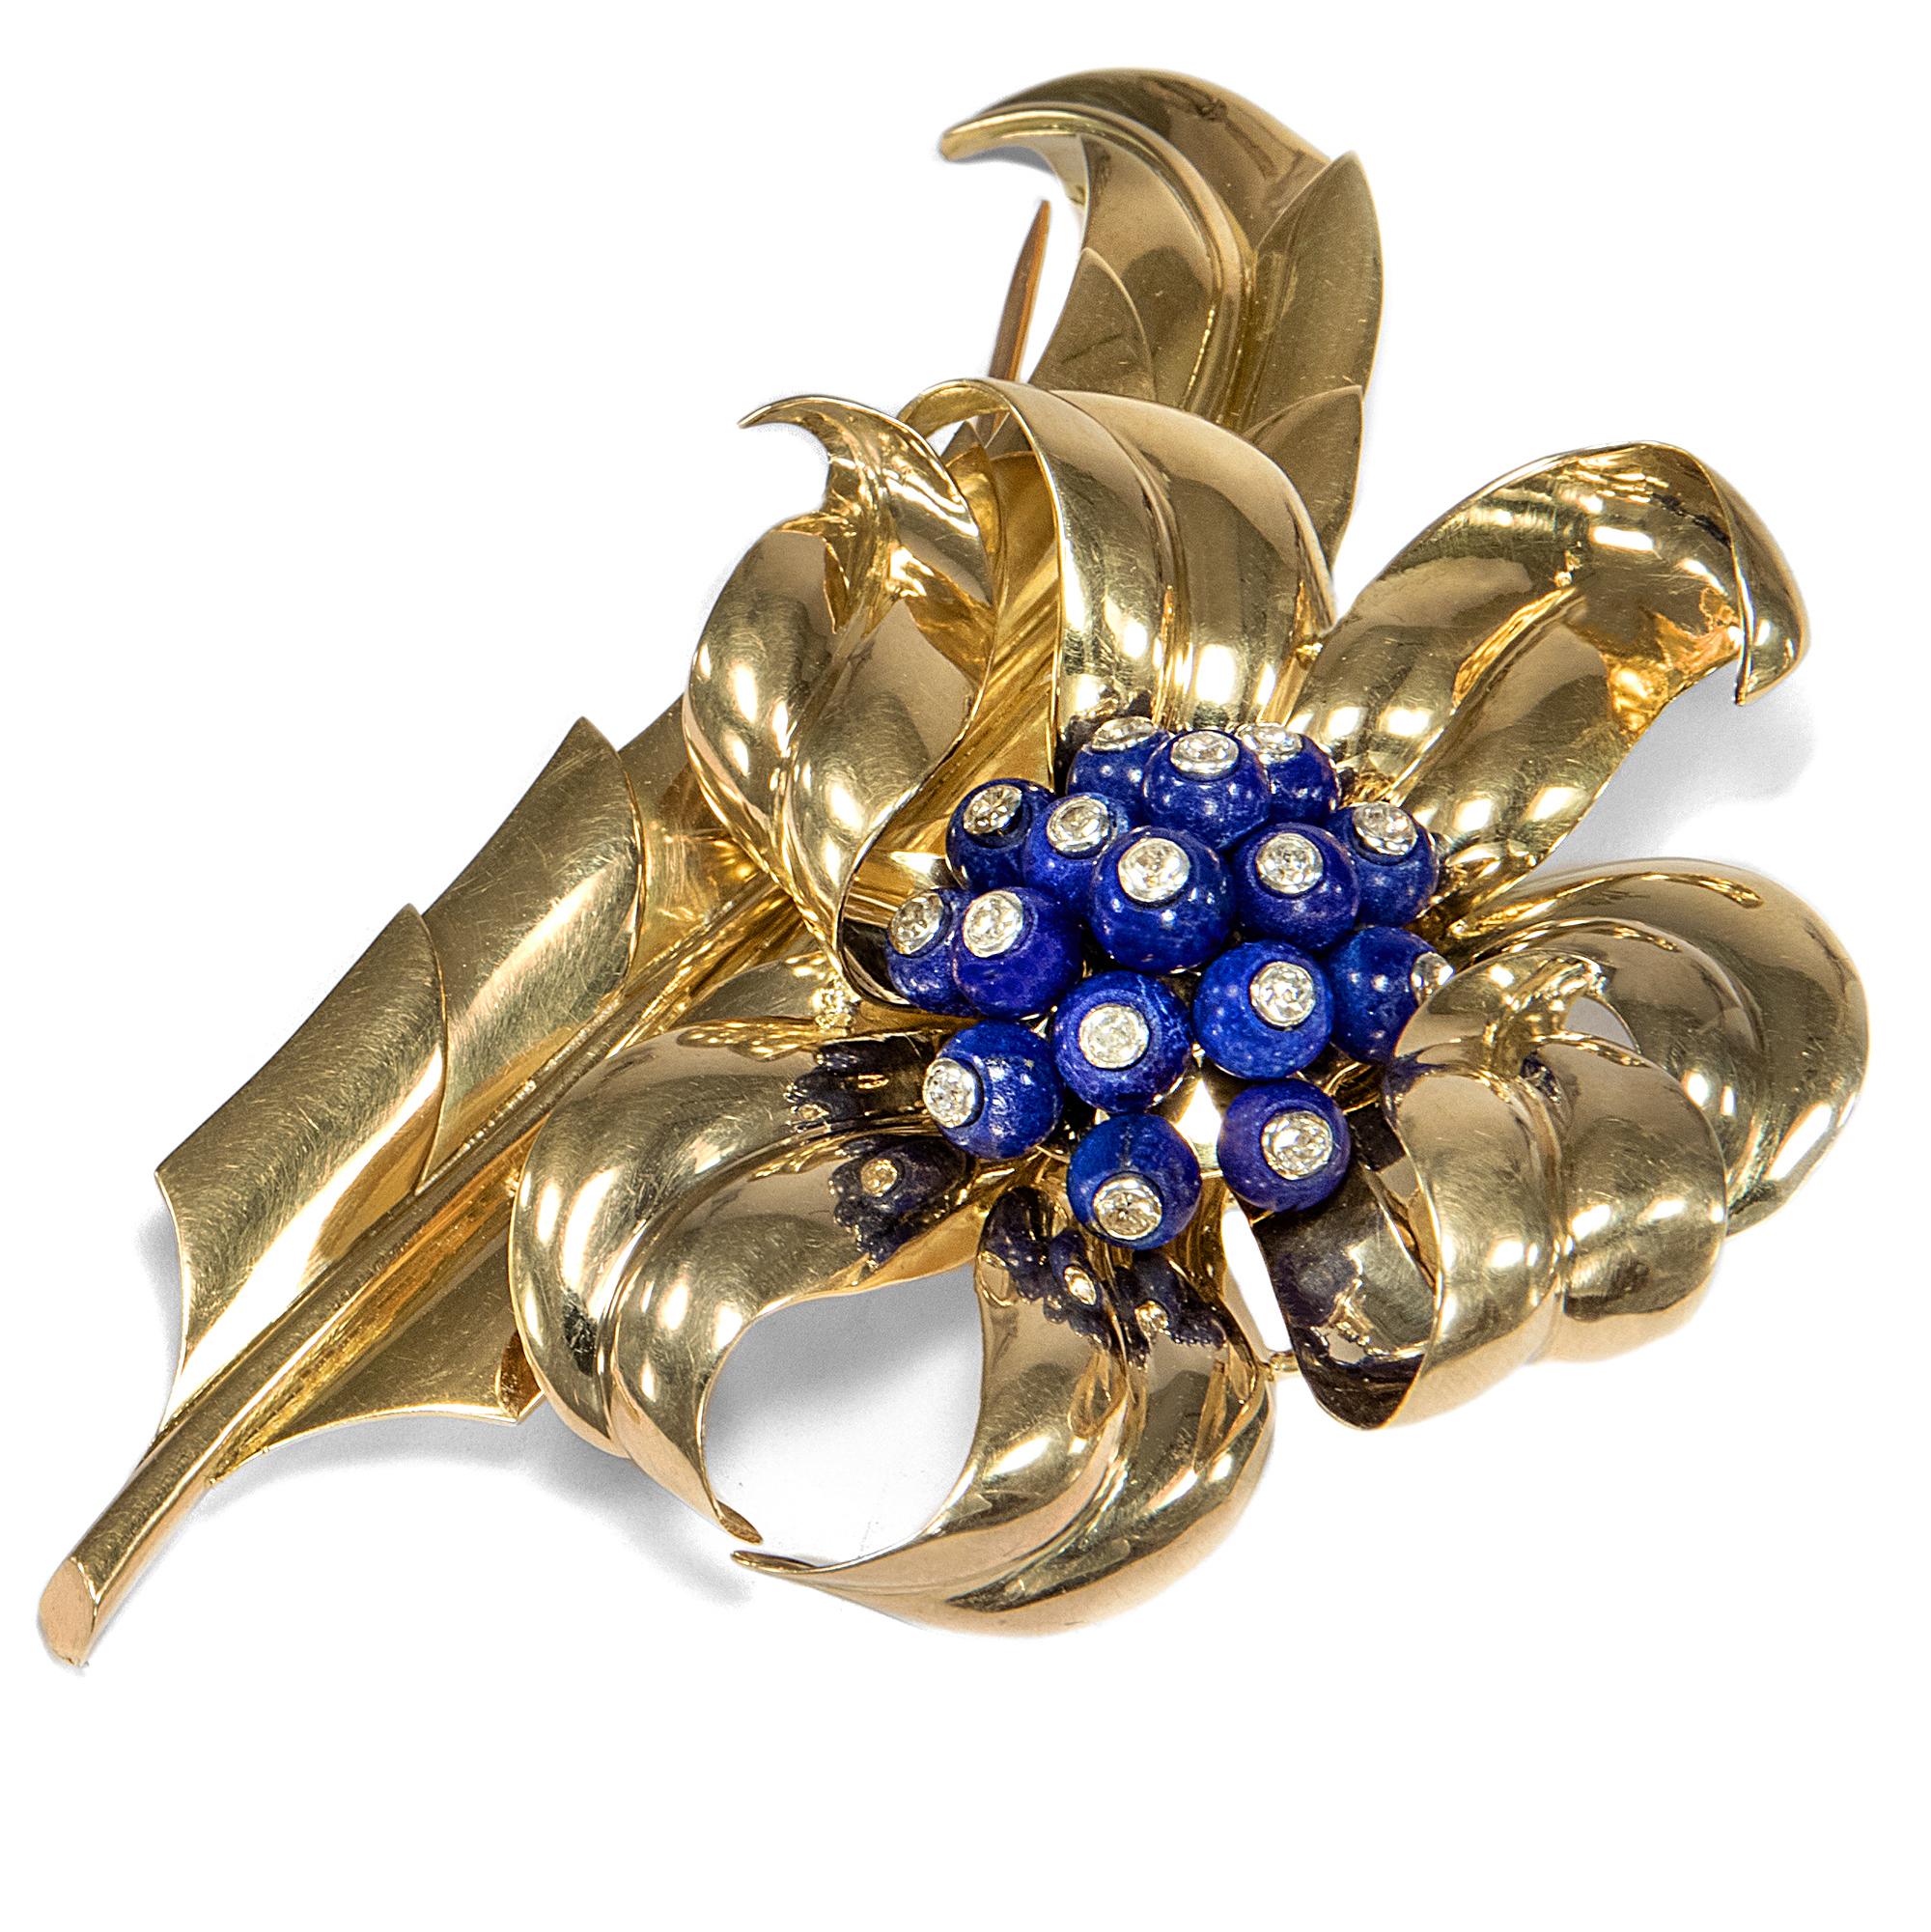 The glamorous vintage brooch at hand takes us back to the 1940s, and to Paris. Unlike other capitals of Europe, Paris had not stopped its jewellery production even in times of war. Important works of the “haute joaillerie” were still being produced